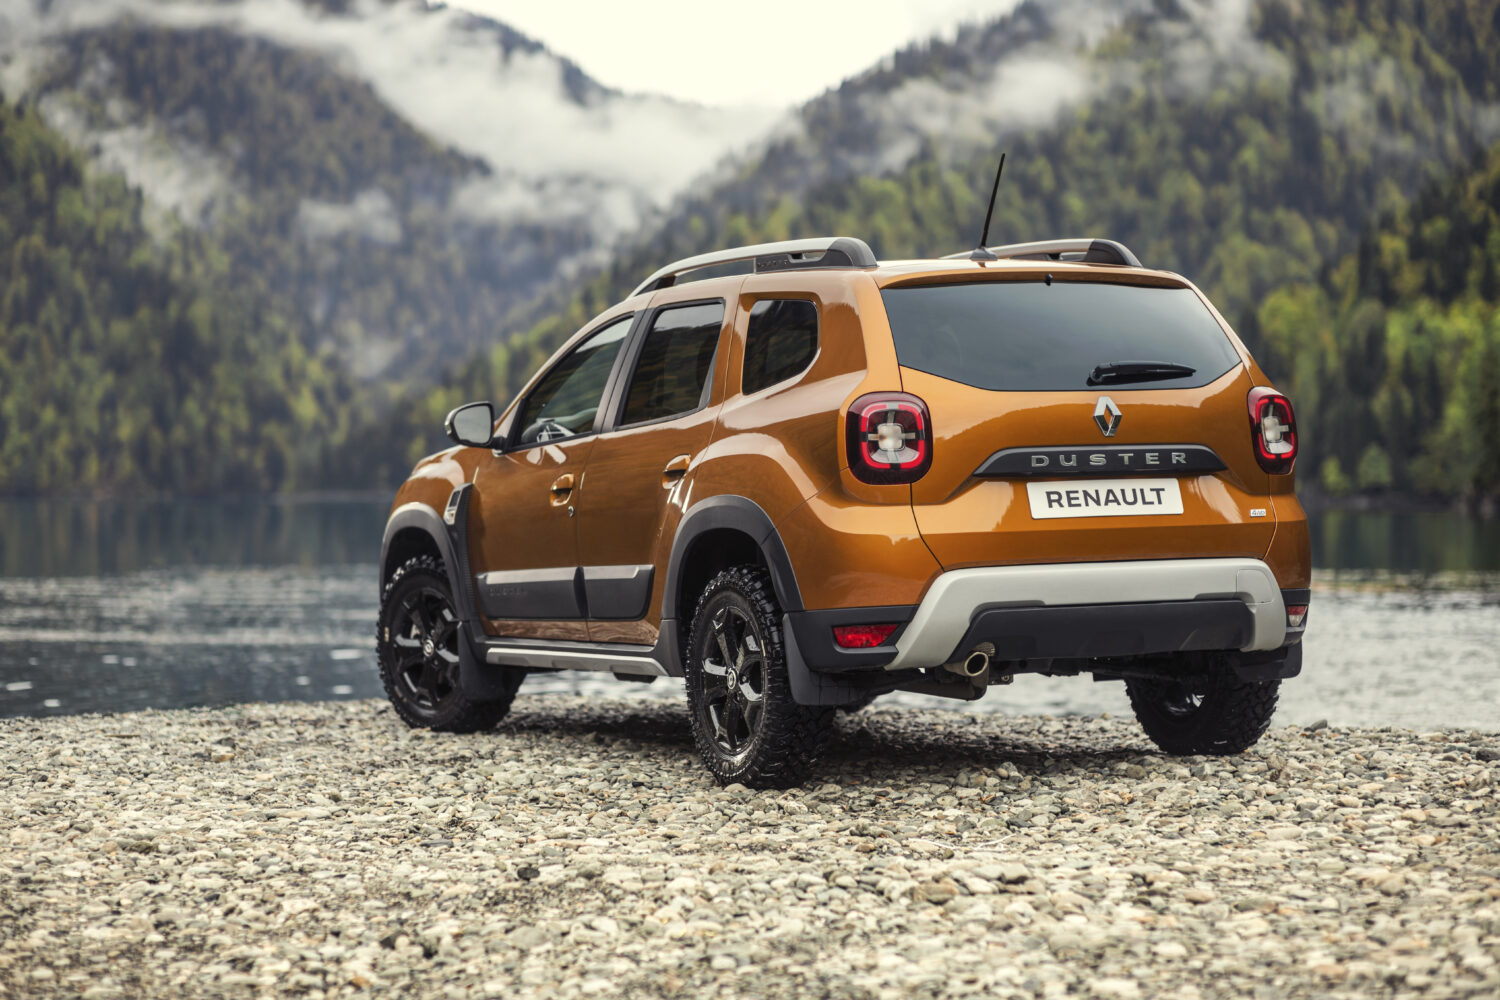 2020 - New Renault Duster